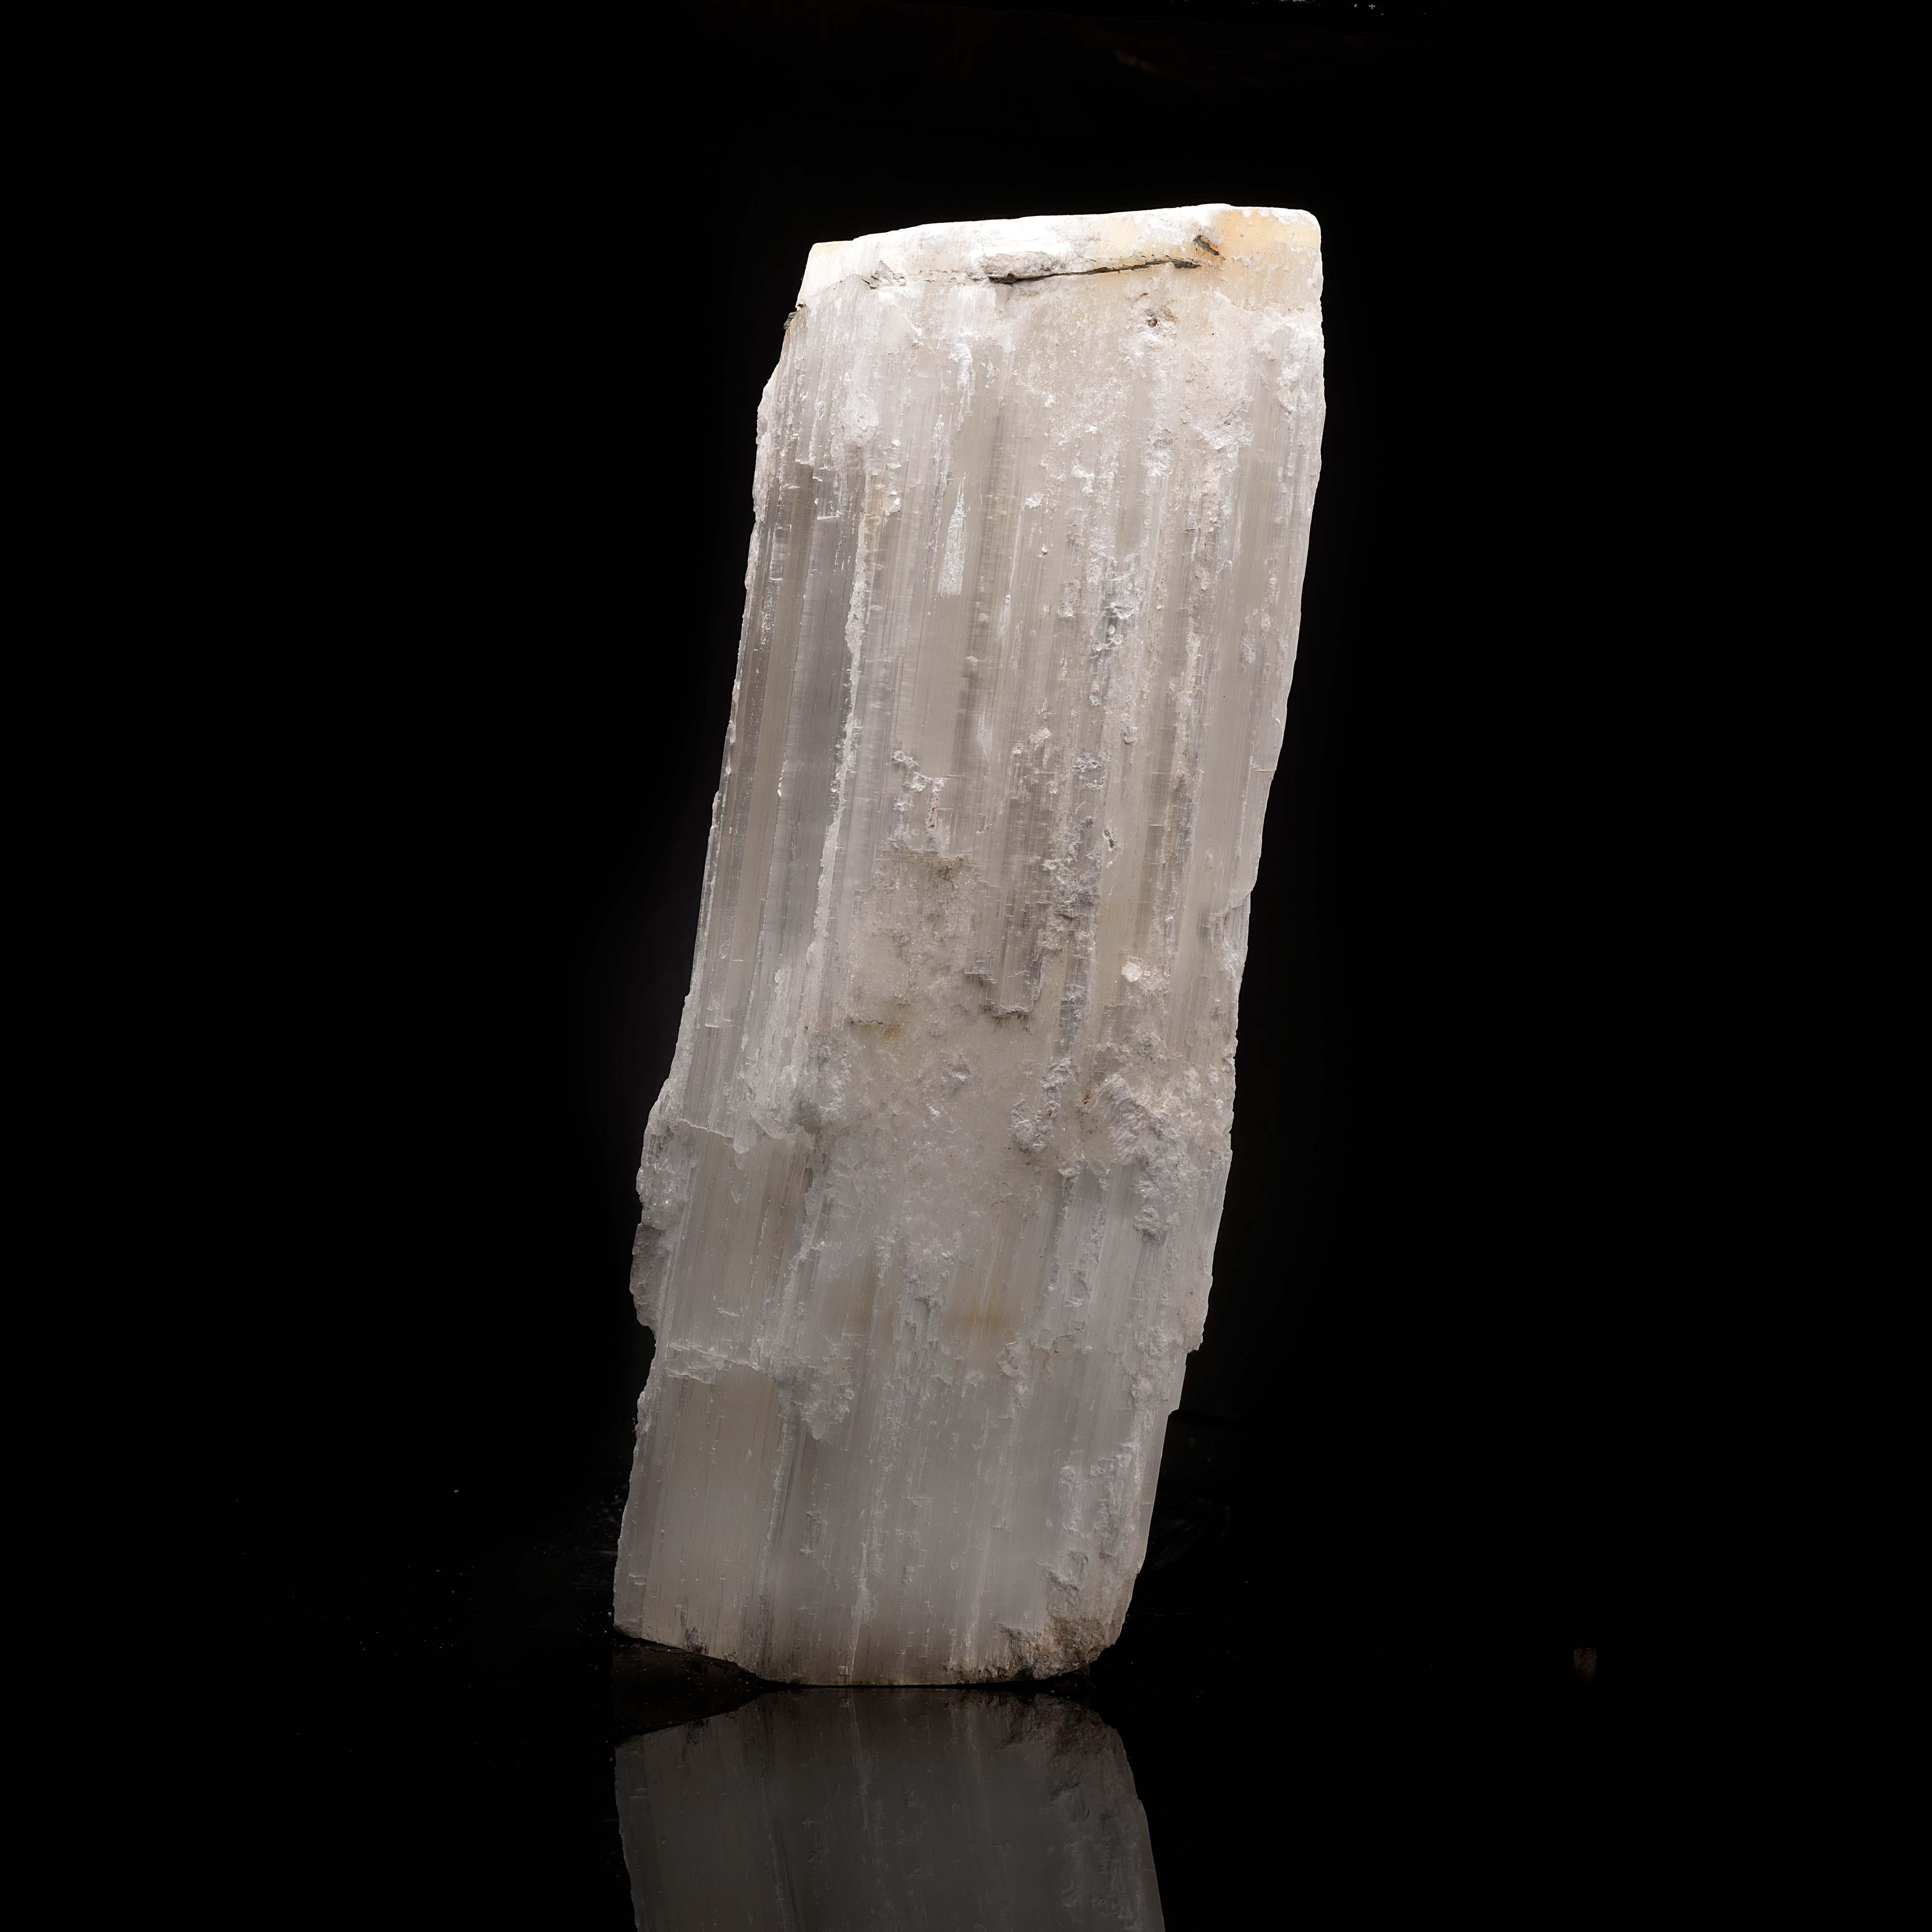 This huge selenite single crystal measures almost a foot and a half high and features a beautiful roughly striated, just-out-of-the-earth appearance. This is a substantial piece certain to add character and uniqueness to any collection or space. The